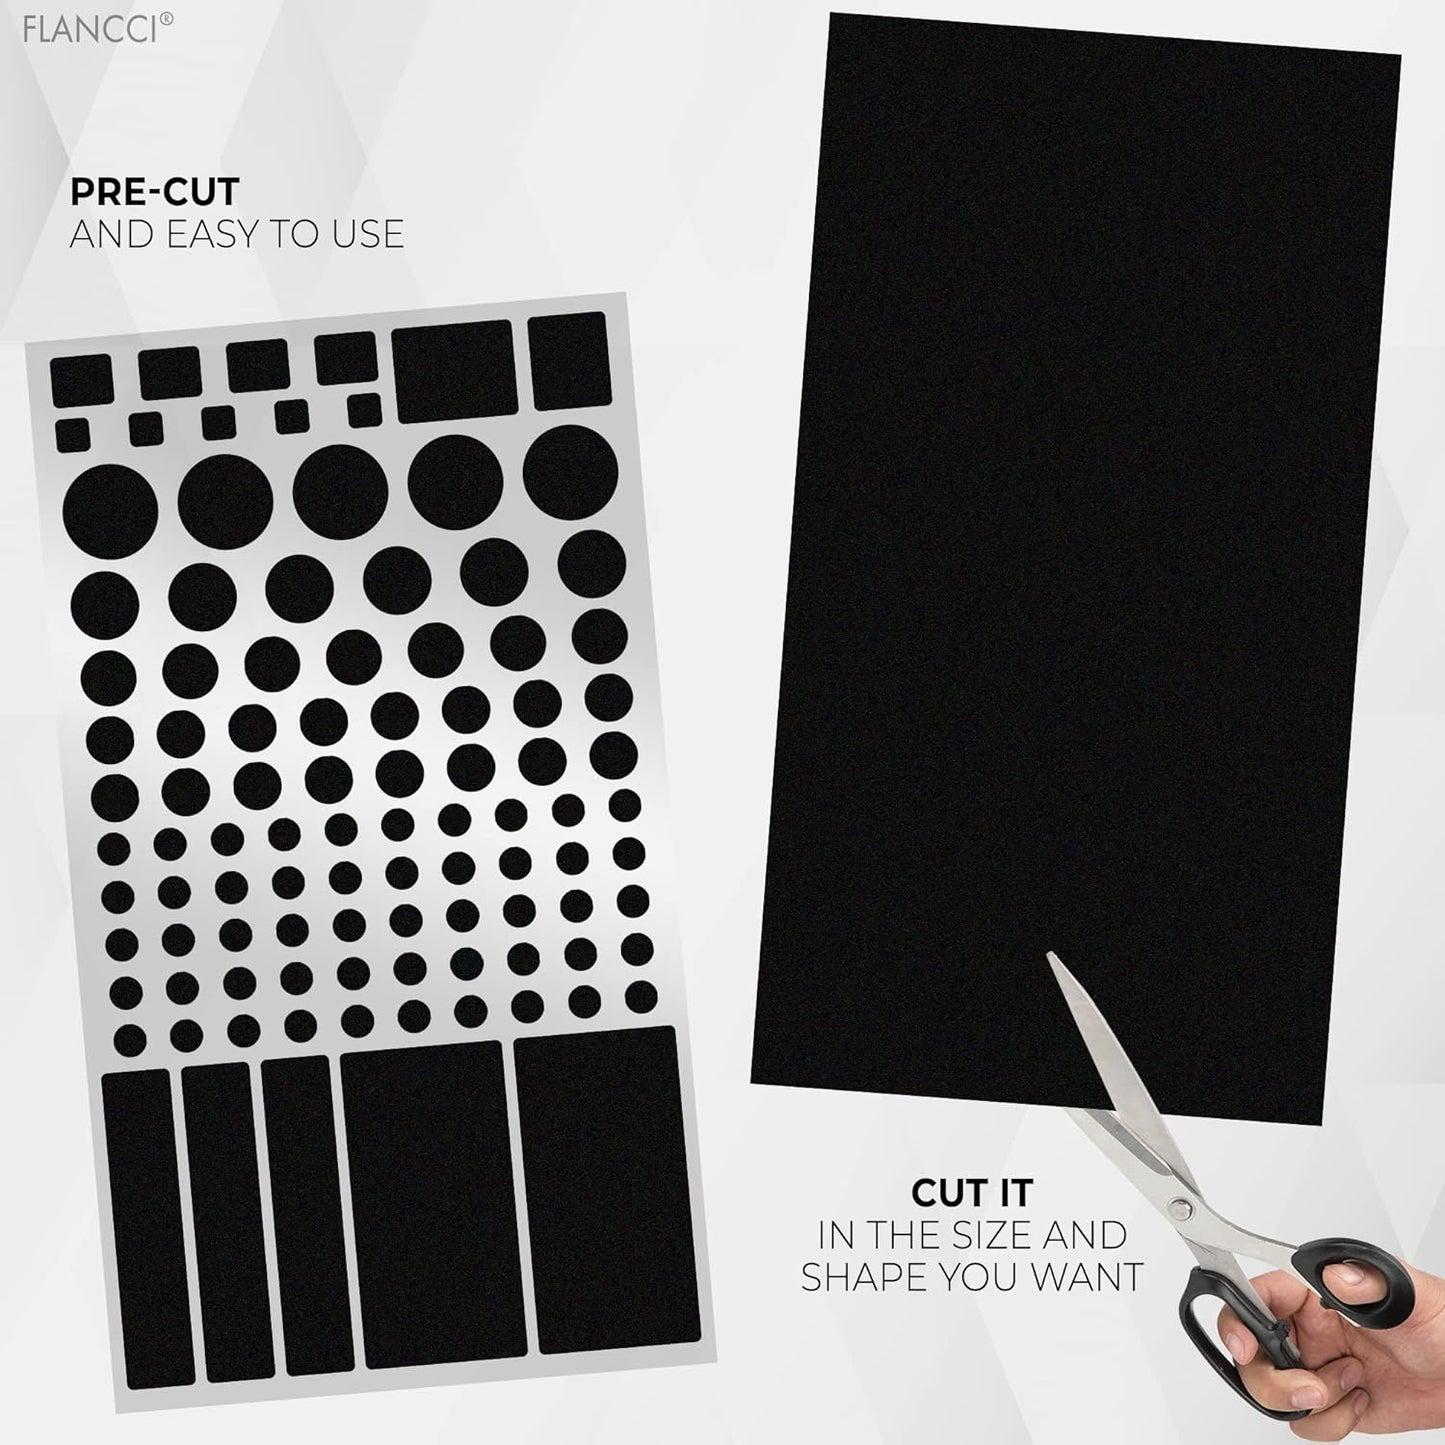 LED Light Blocking Stickers, Light Dimming LED Filters, (2 Sheets) Dimming Sheets for Routers, LED Covers Blackout, Dimming 50% ~ 80% of LED Lights, (2Sheets = 1 Cut Out + 1 Uncut)